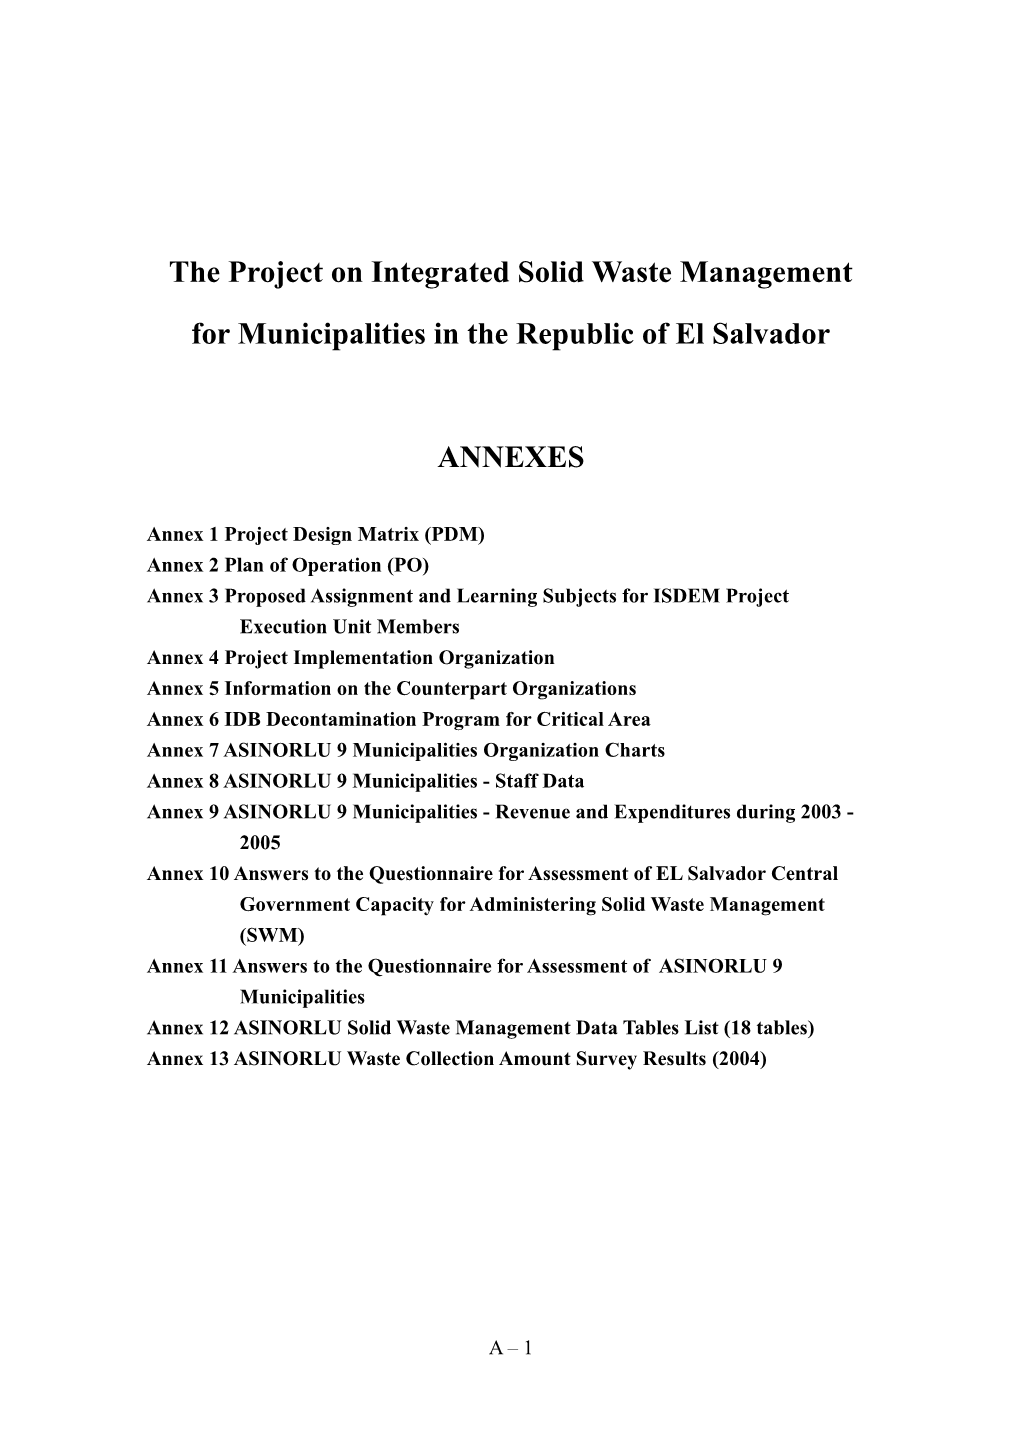 The Project on Integrated Solid Waste Management for Municipalities in the Republic Of